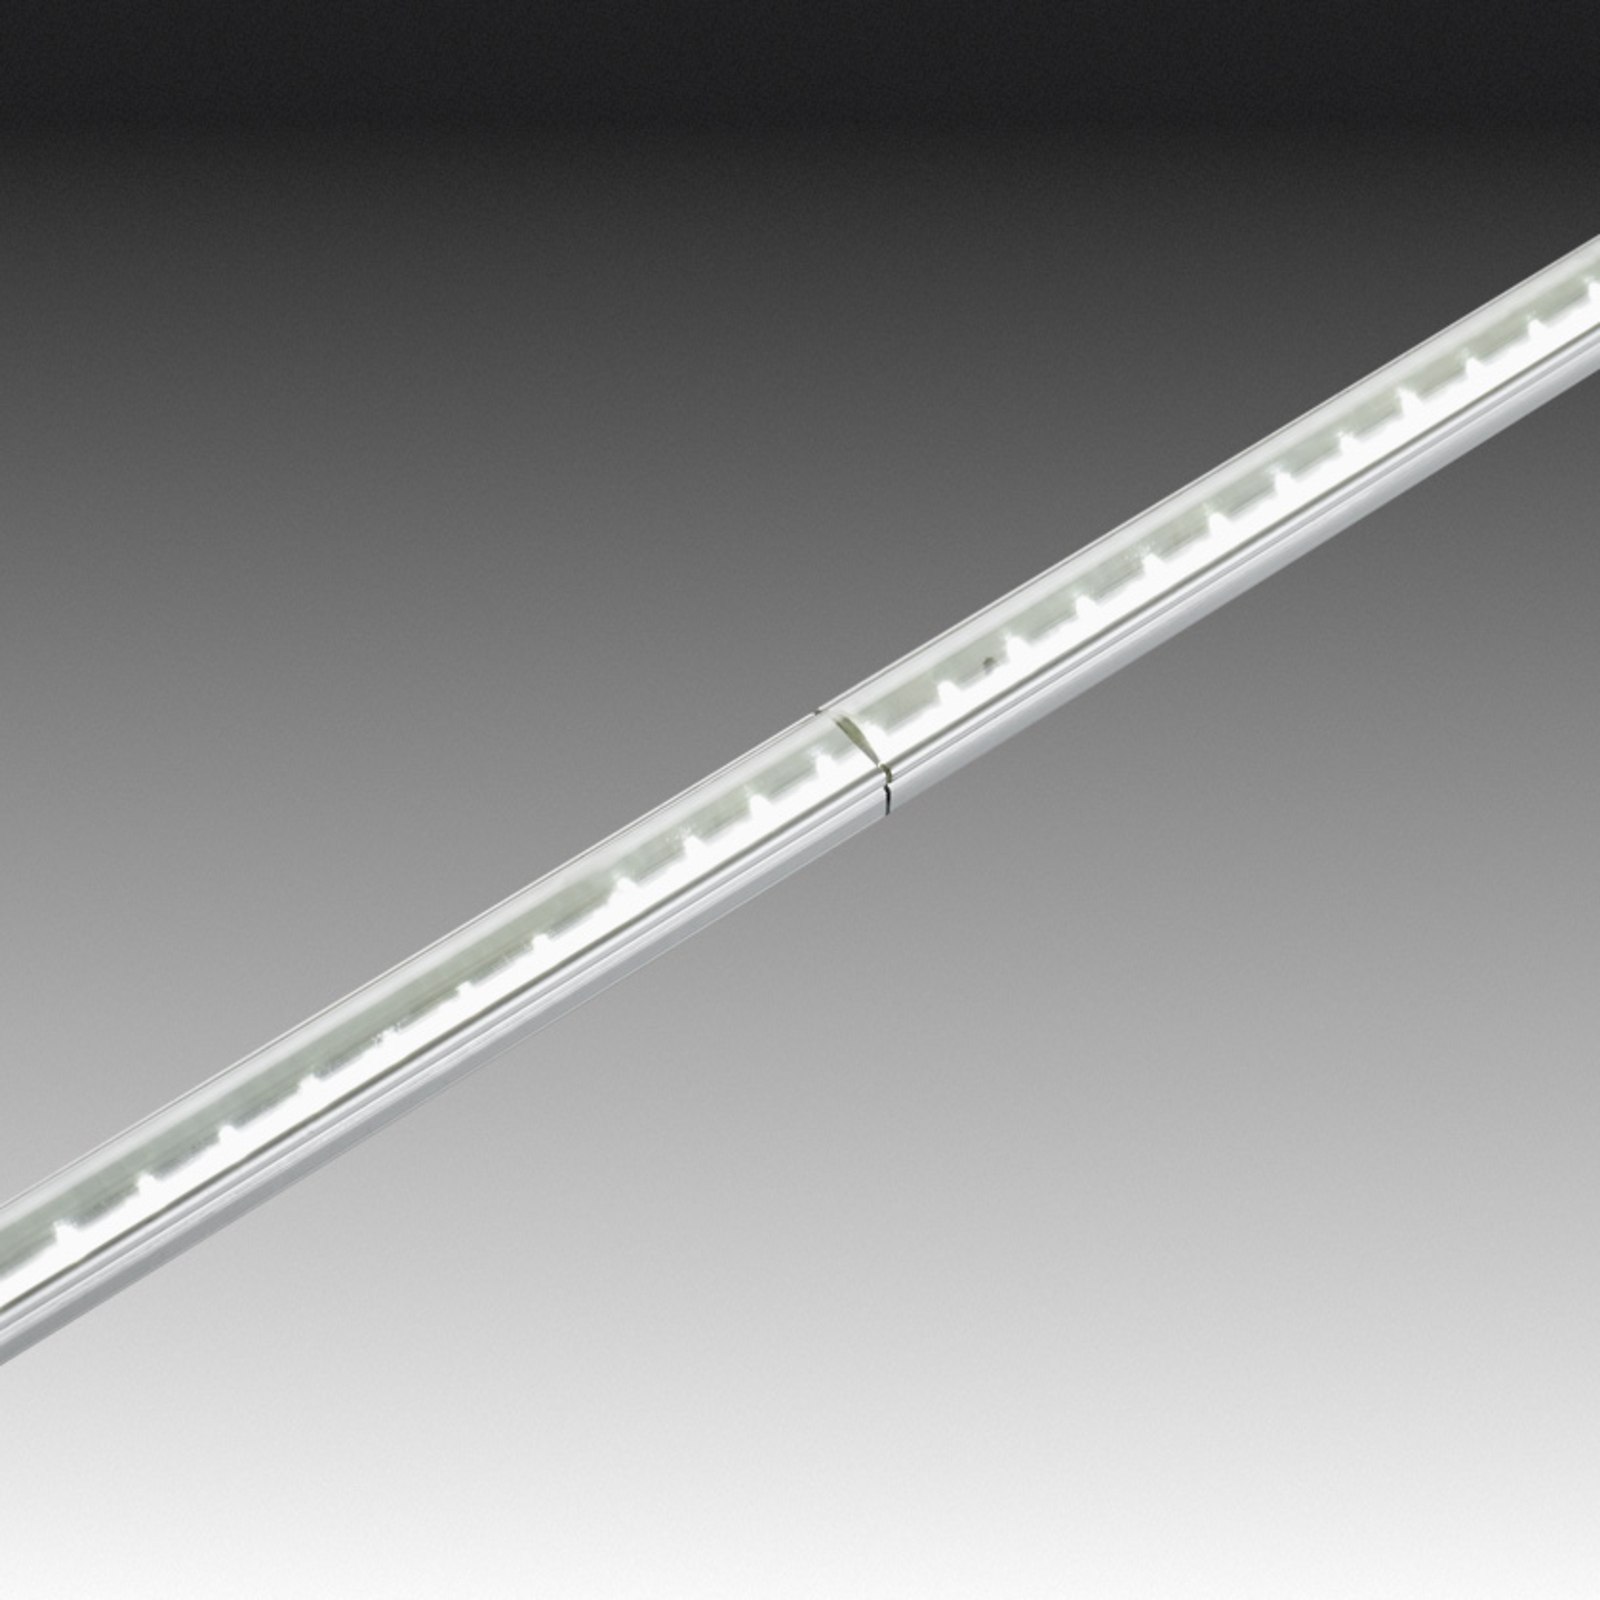 LED staaf LED Stick 2 voor meubels, 30cm, warmwit